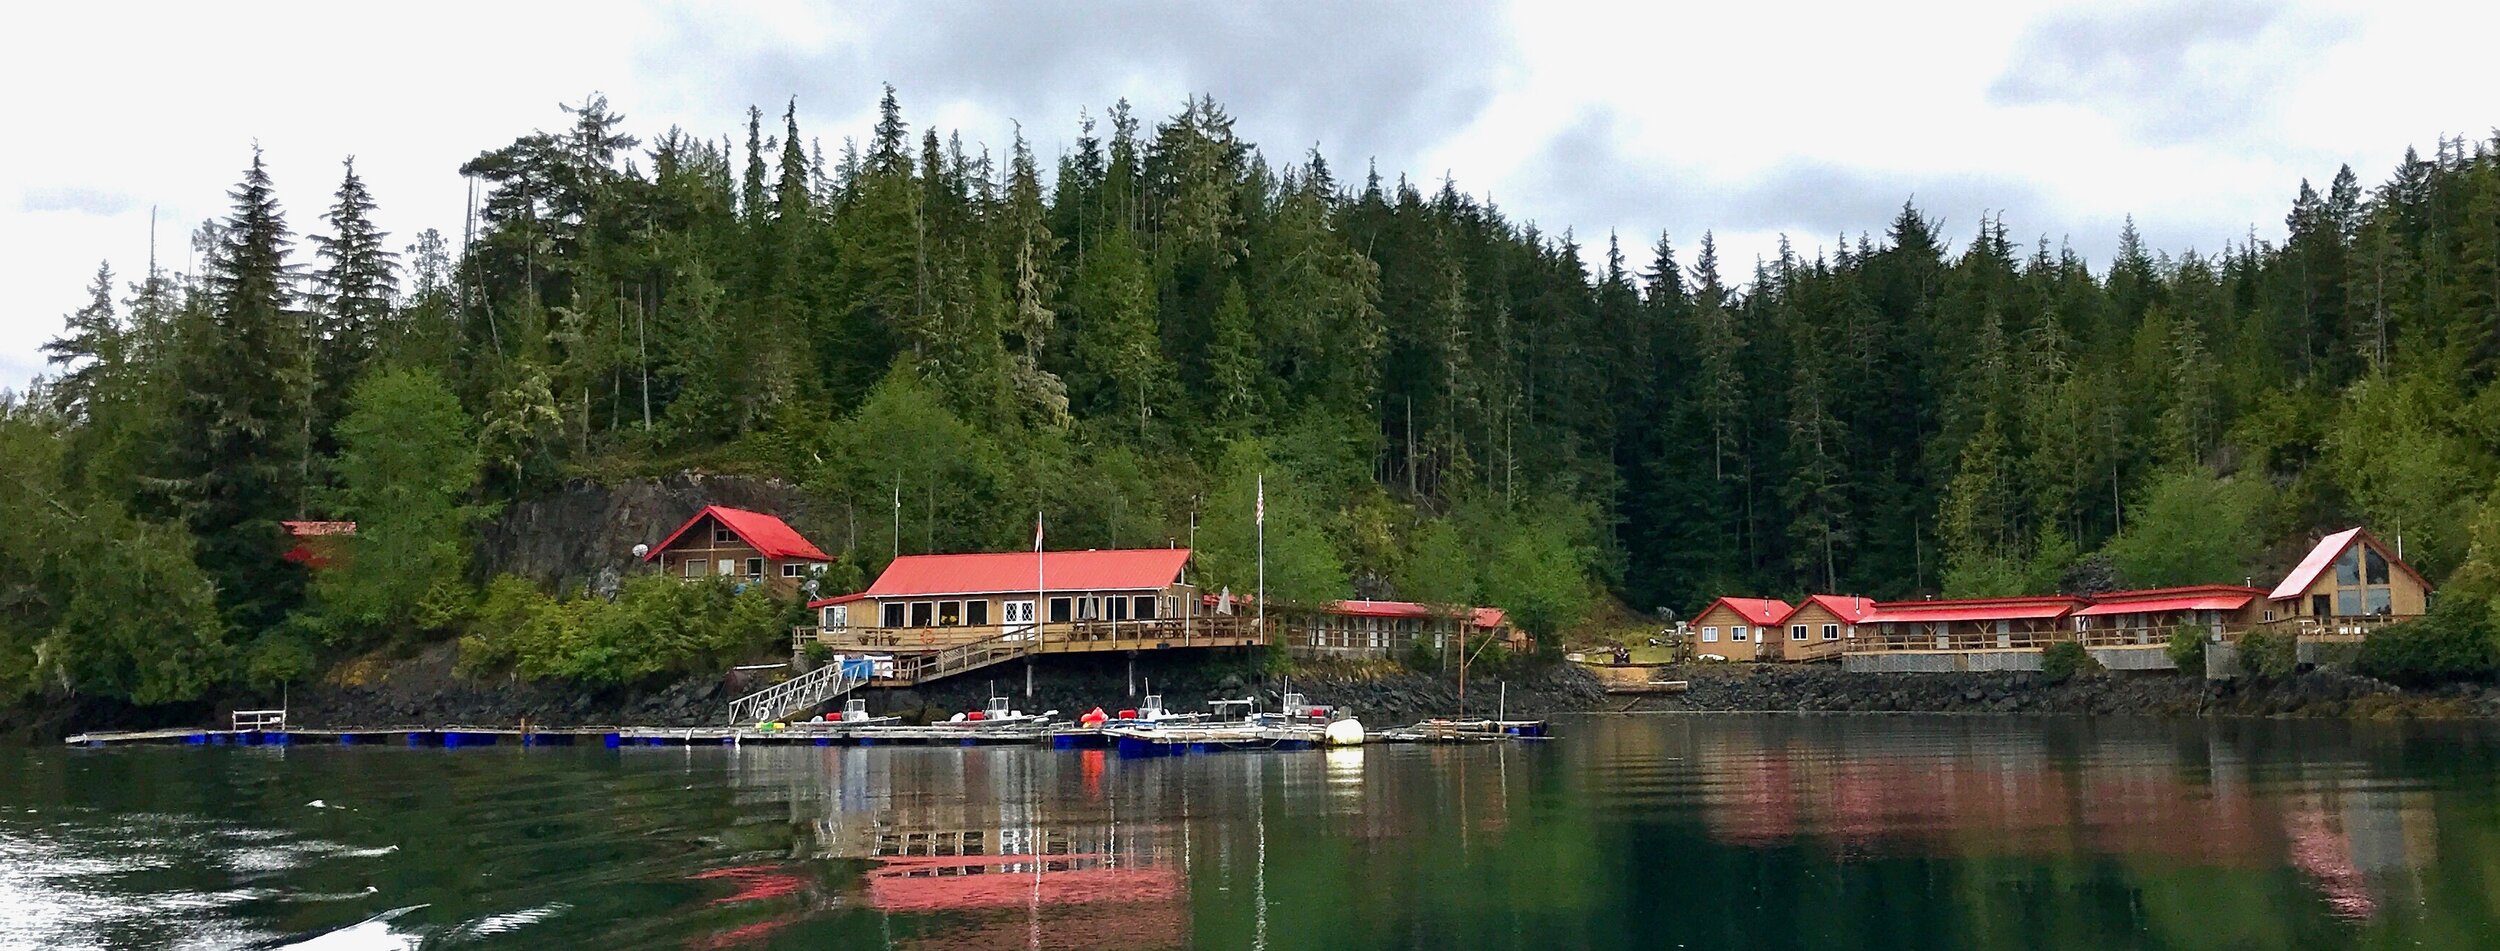 Lodge at Double Bay, Hanson Island, British Columbia - photo by Michael Reppy